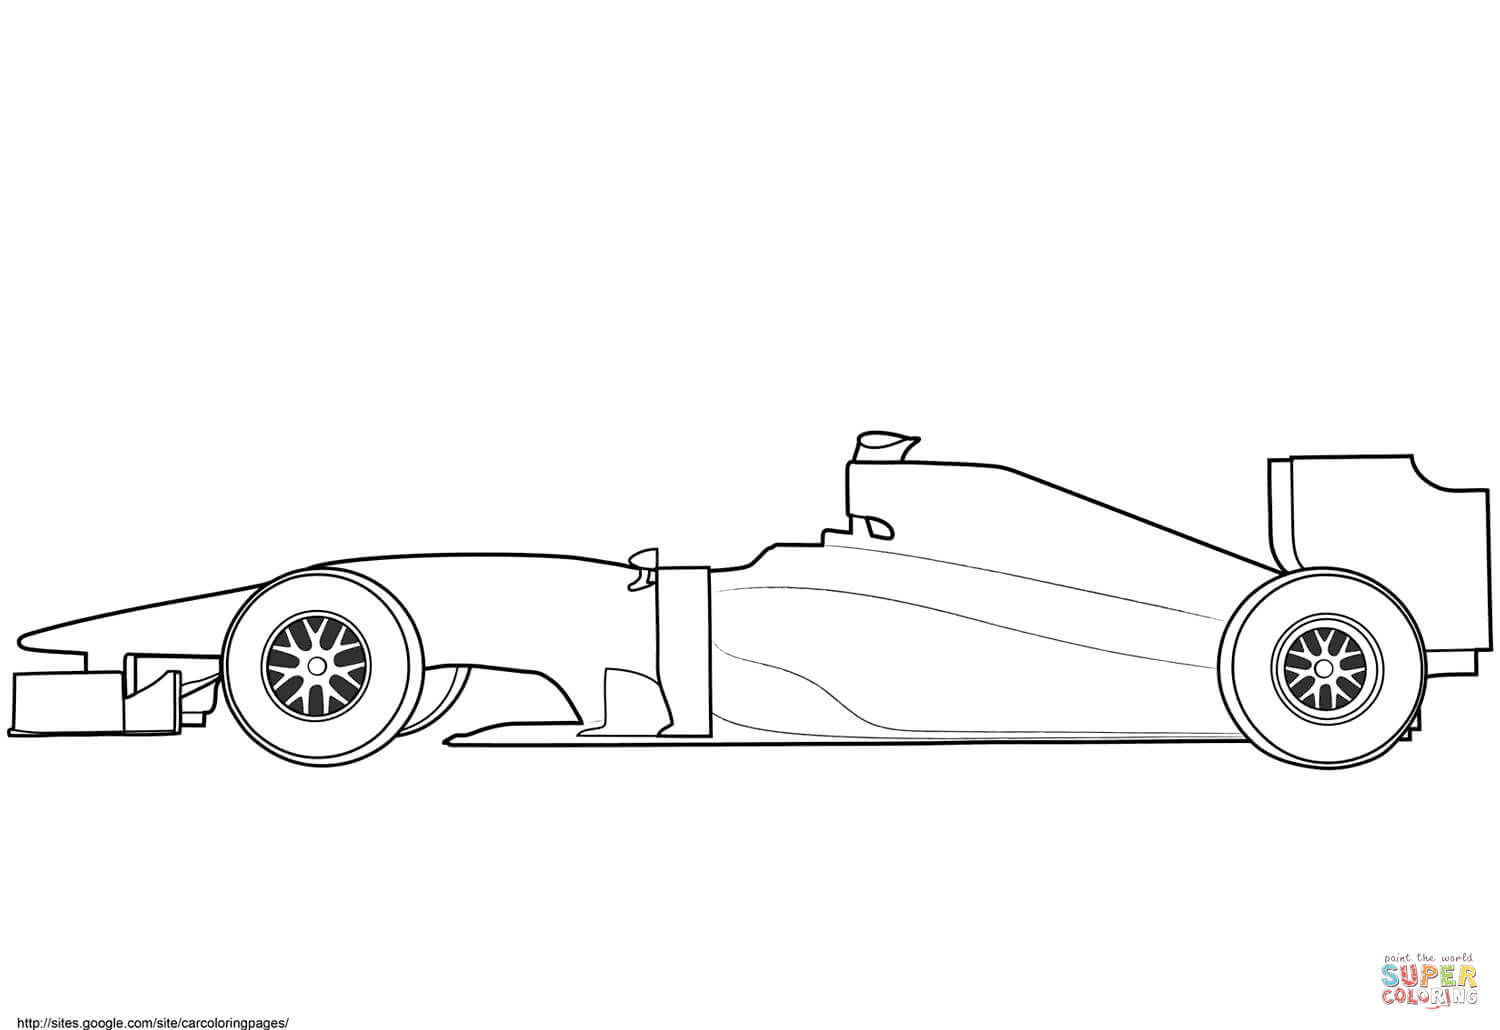 Blank Formula 1 Race Car Coloring Page | Free Printable Intended For Blank Race Car Templates